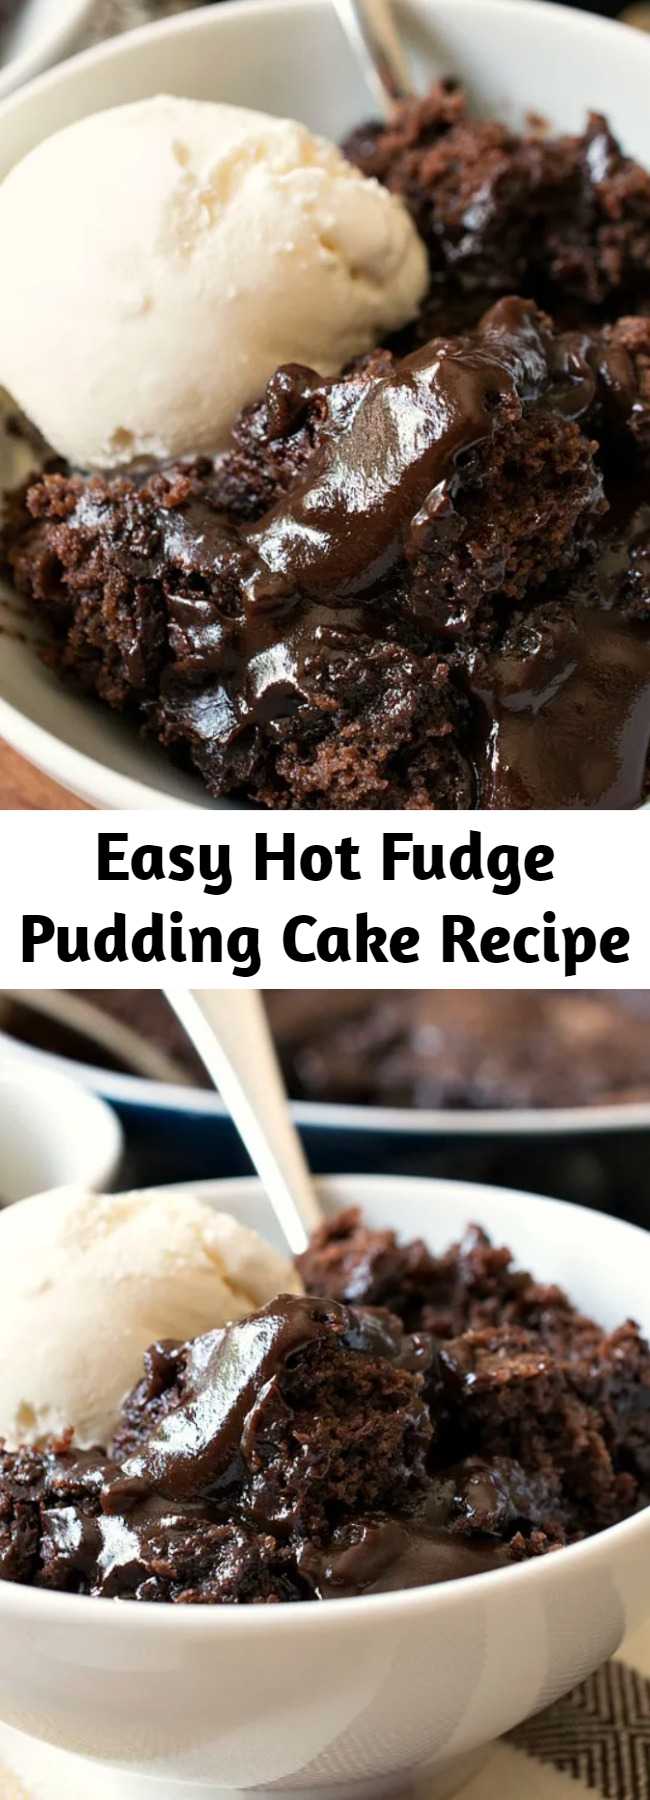 Easy Hot Fudge Pudding Cake Recipe - Hot Fudge Pudding Cake is a delicious, easy vintage recipe that everyone absolutely loves! A fudge sauce forms under a rich chocolate cake as it bakes in the oven. #puddingcake #chocolatedessert